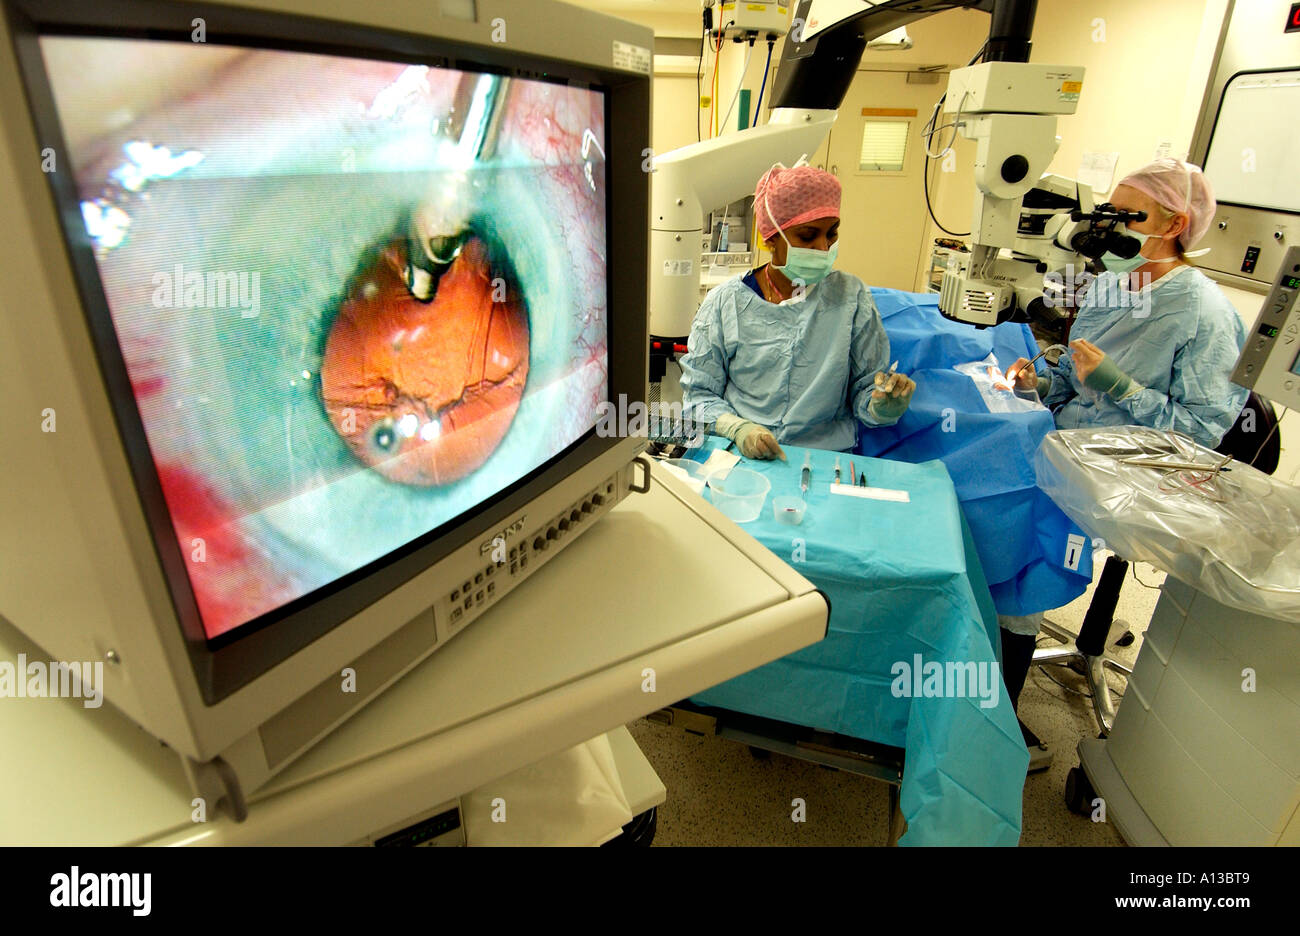 Cataract operation seen in close up on operating theatre screen with woman doctor and nurse behind. Stock Photo